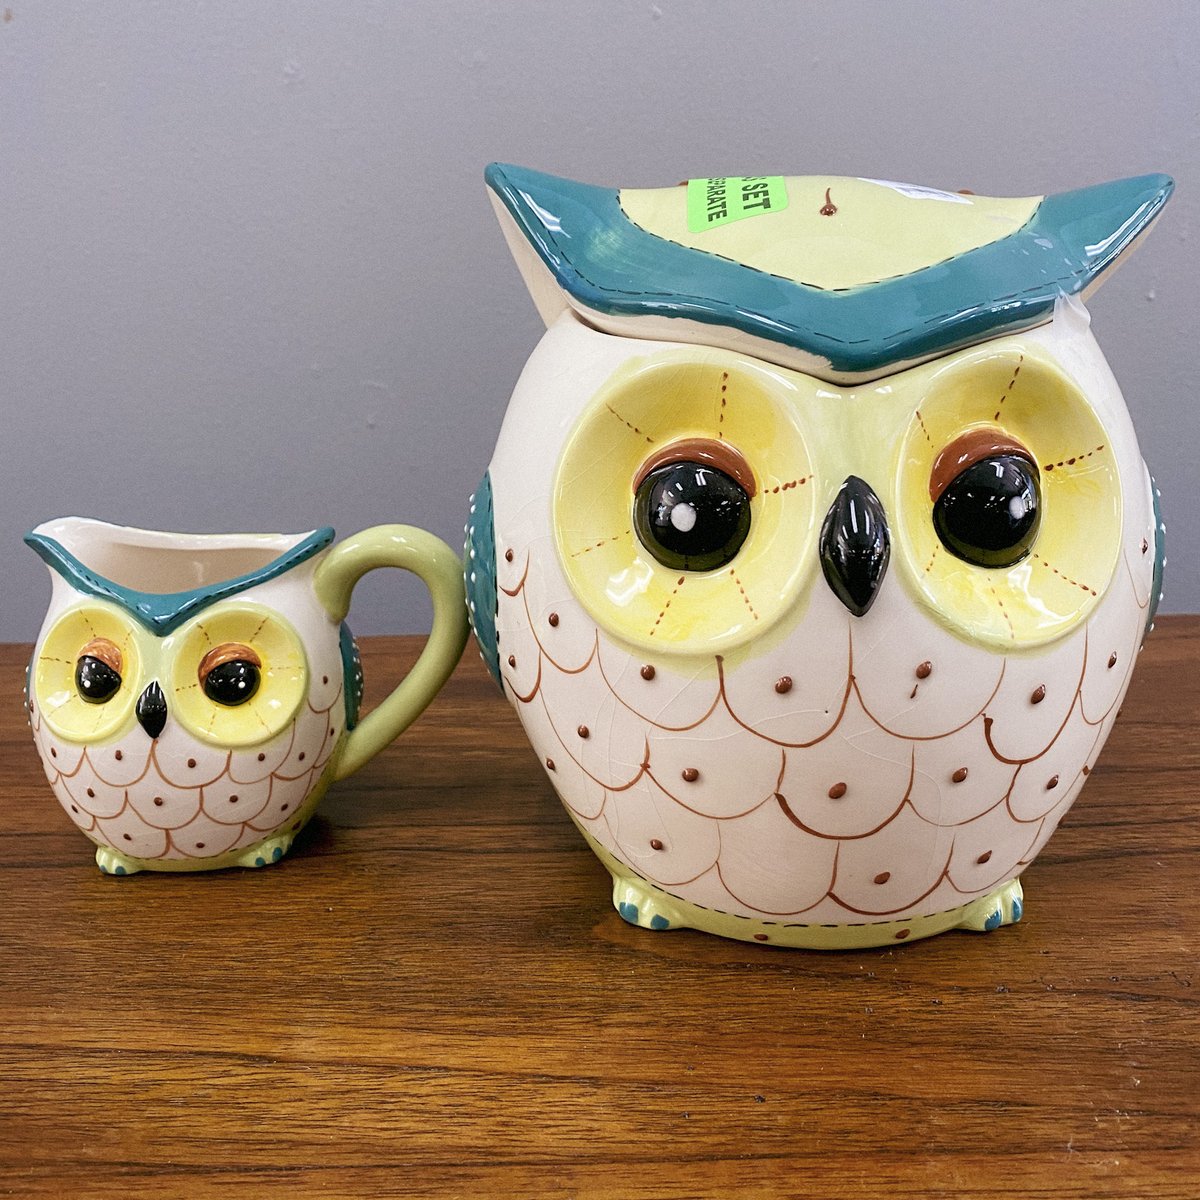 Hoot-worthy treasures! 🦉

Select one of our new or like new items at Bloom Again with all proceeds going to @MetroMinistries ❤️

#BloomAgainThriftStore #MetropolitanMinistries #InspireHope #Treasures #Thrifting #TampaBay